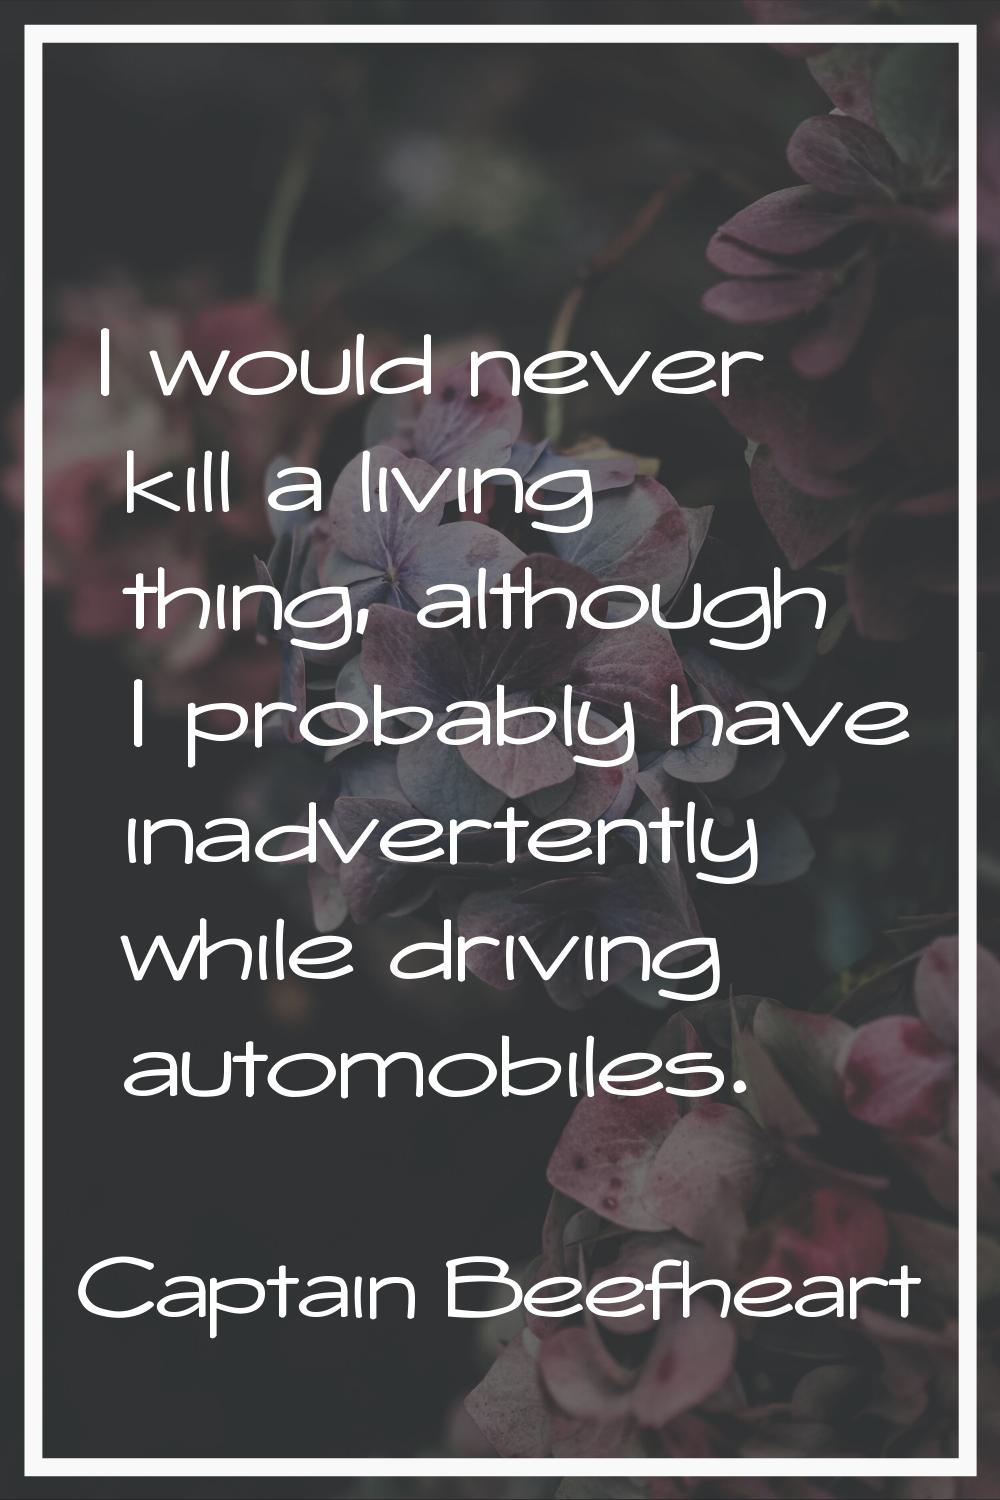 I would never kill a living thing, although I probably have inadvertently while driving automobiles